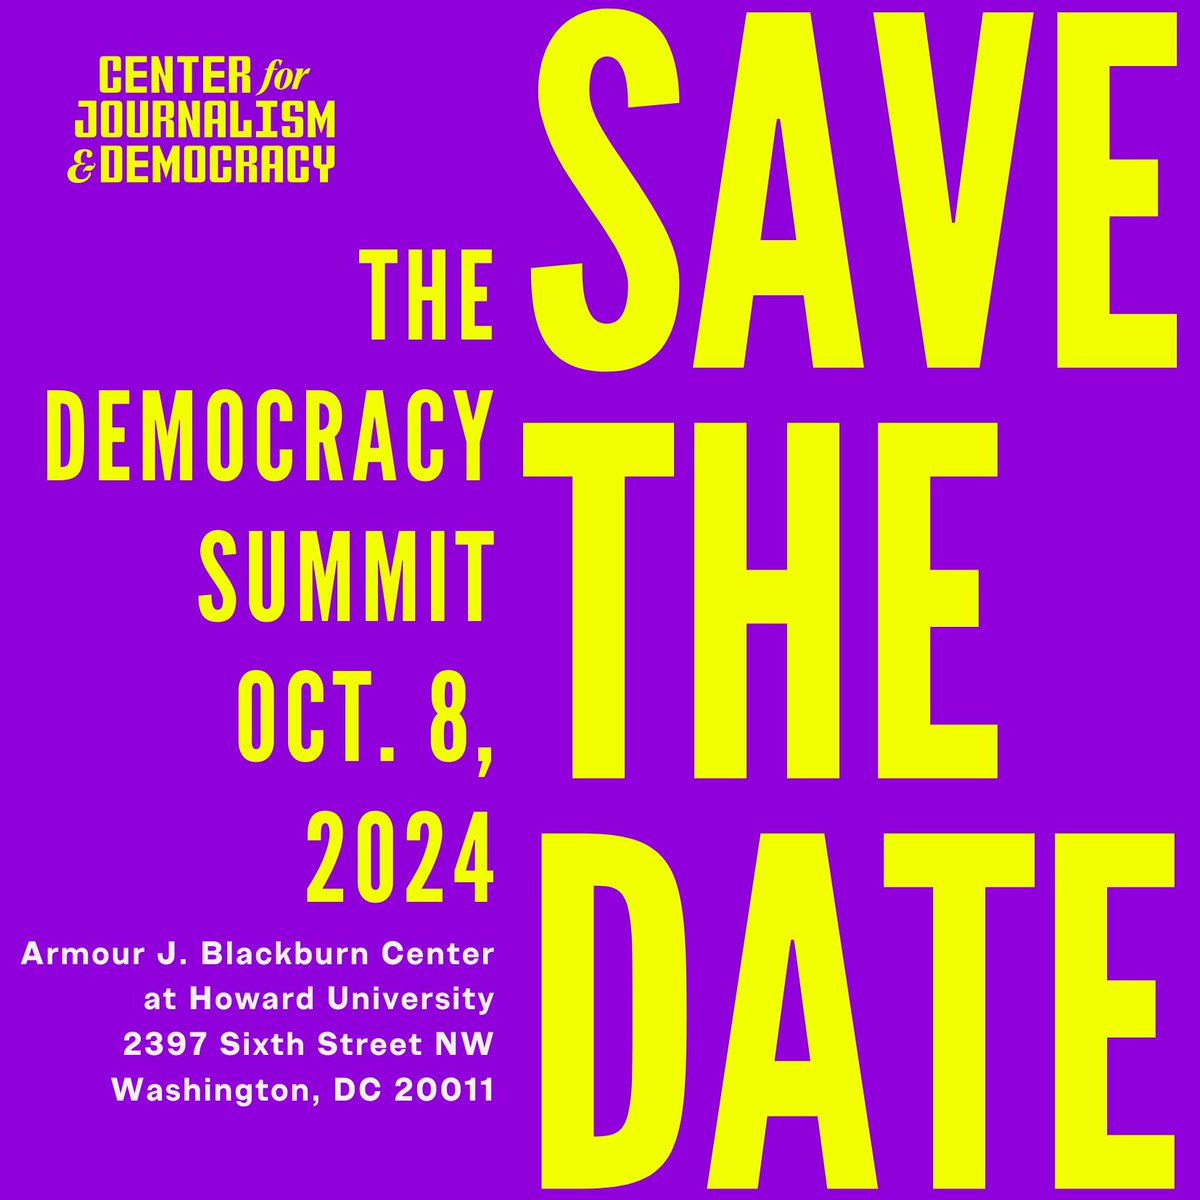 Mark your calendars! The Democracy Summit will return to Howard University on Oct. 8, 2024. More details to come this summer. We look forward to seeing you this year!